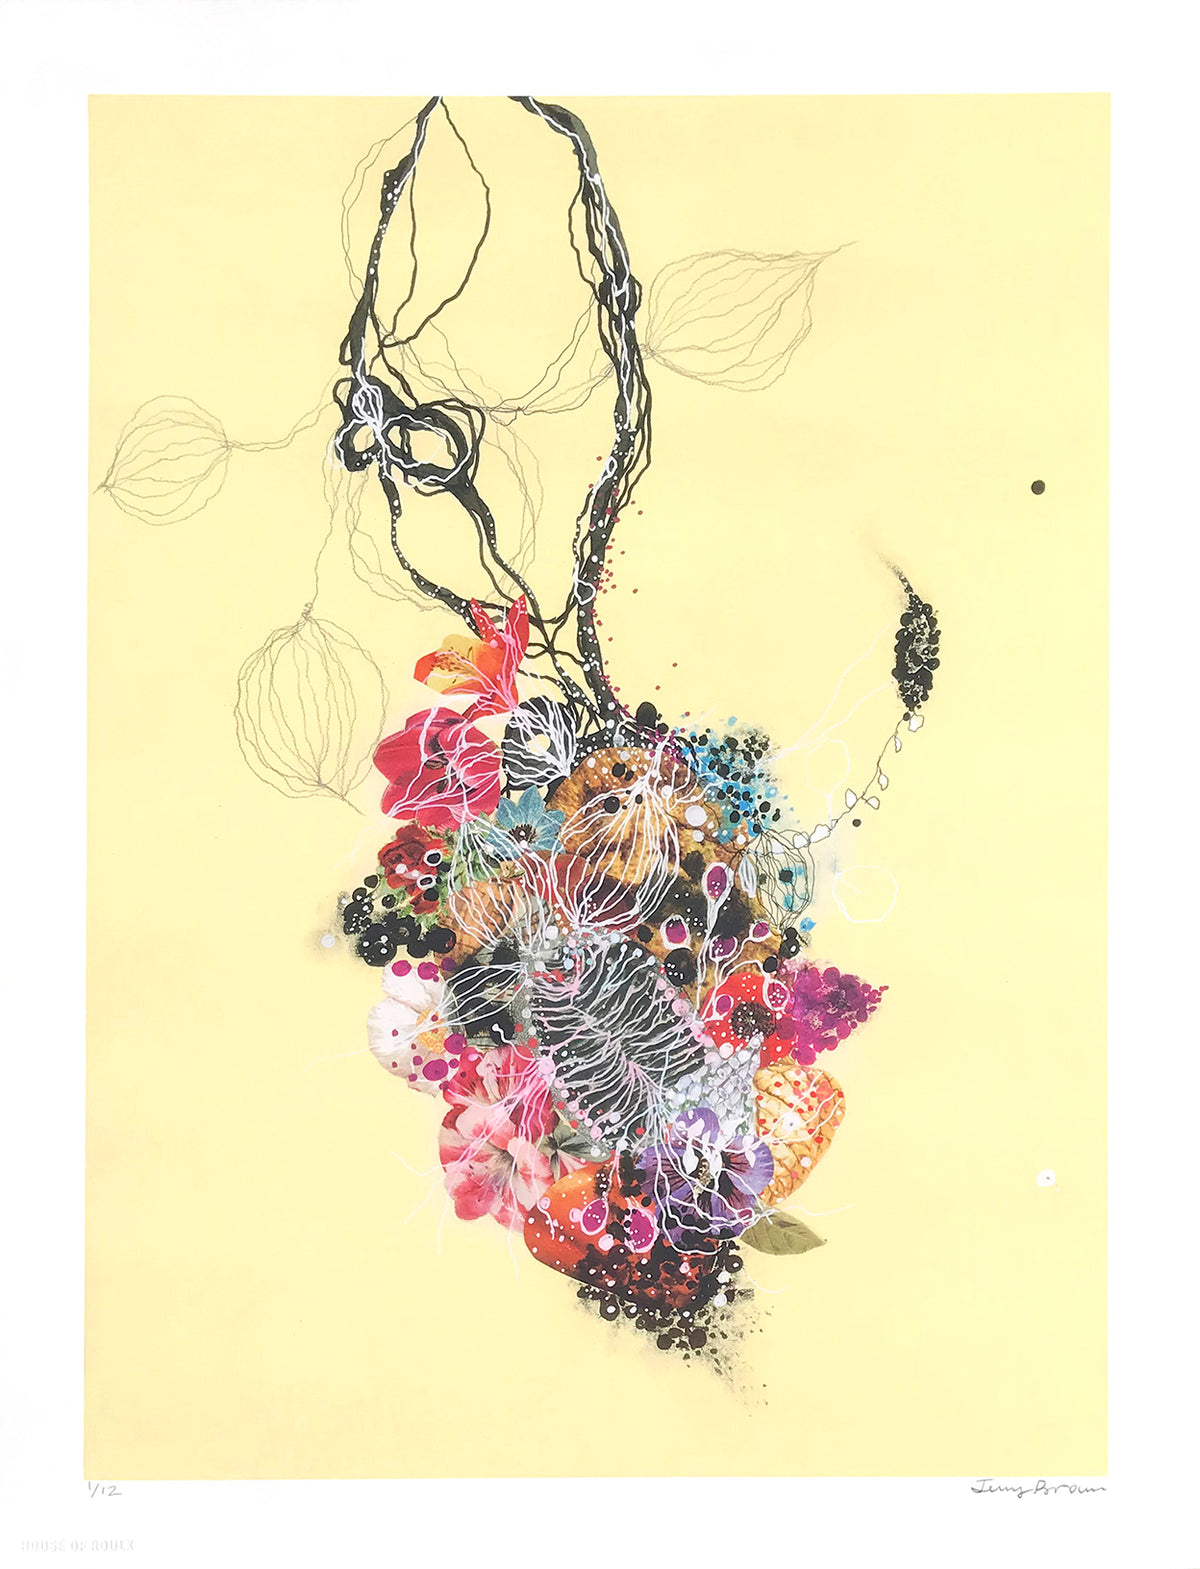 Jenny Brown &quot;Wild Ghost Vine&quot; - Archival Print, Limited Edition of 12 - 13 x 17&quot;